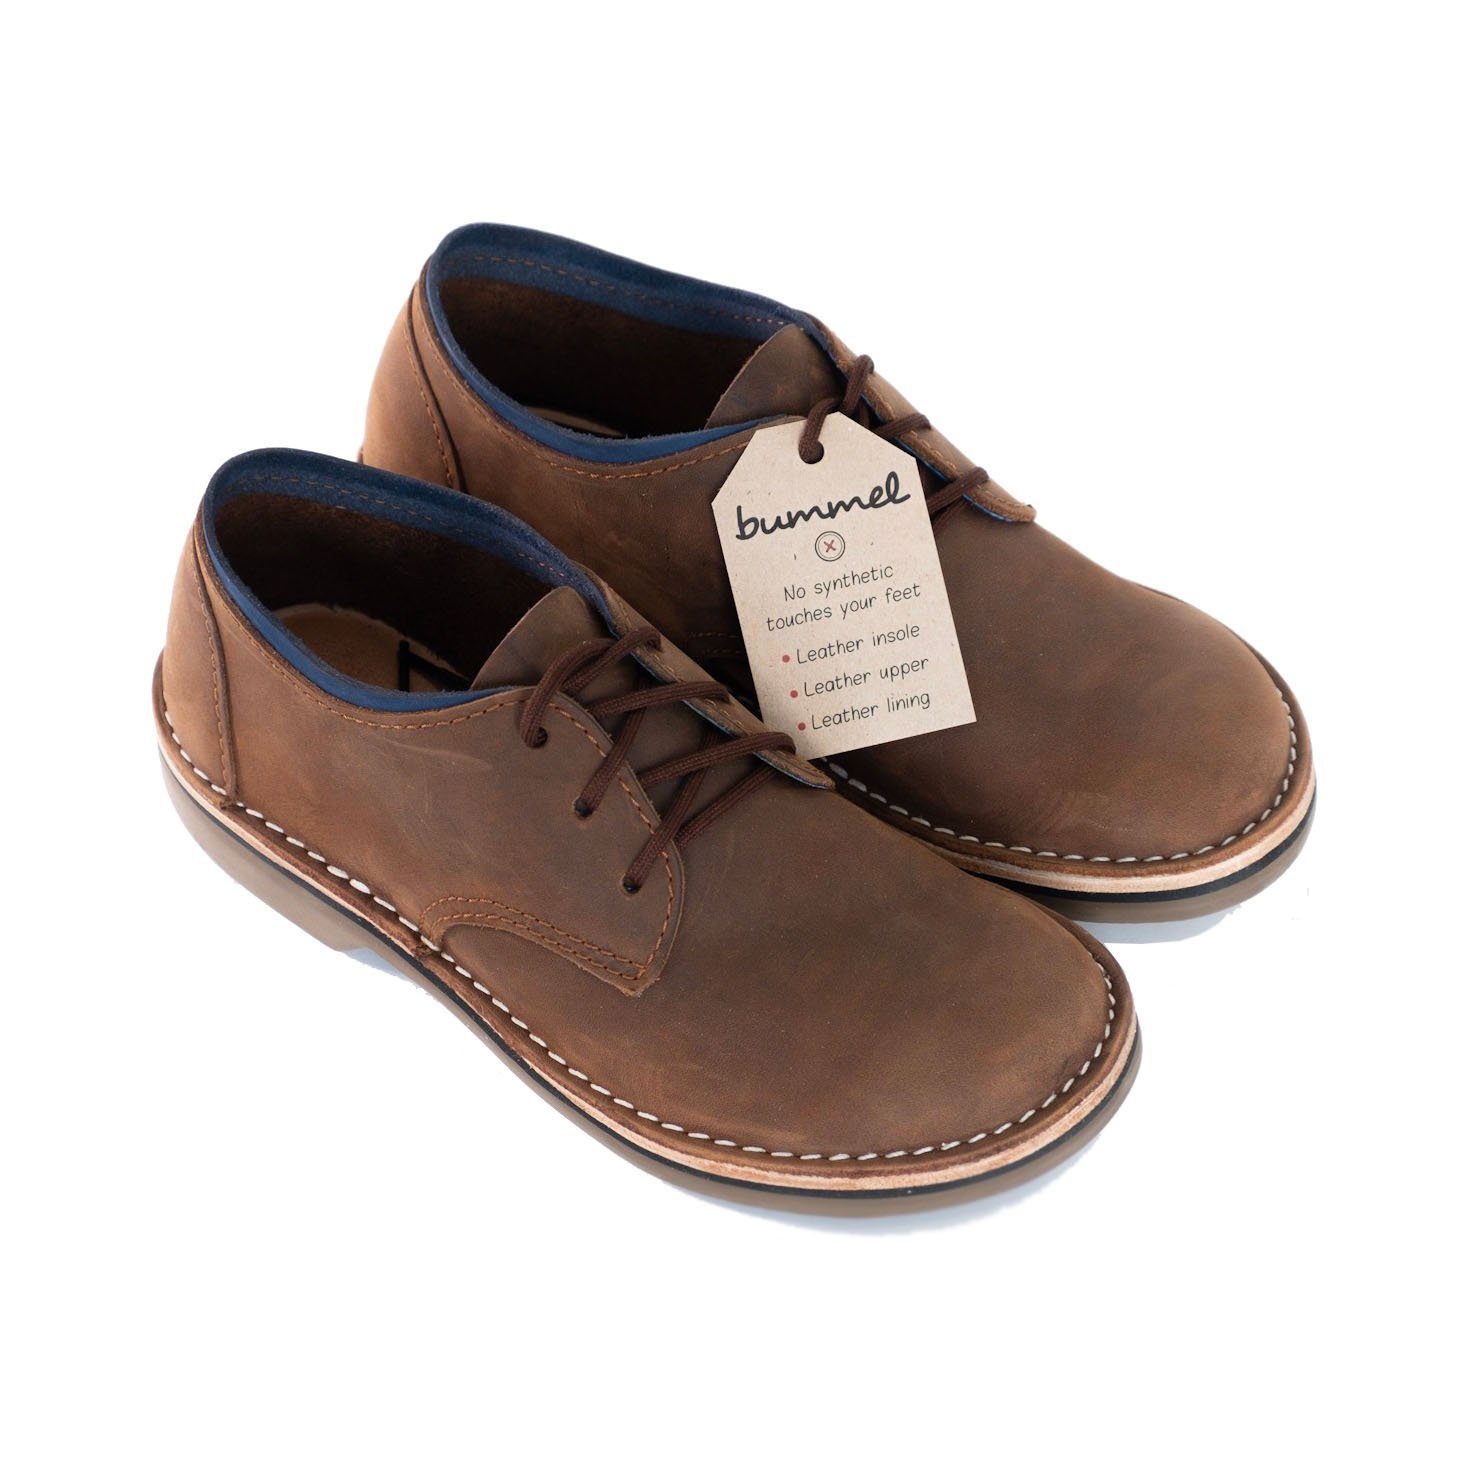 Bummel Azizi Soft Oily Pull Up Brown Leather Shoe clothing & accessories Bummel Shoes